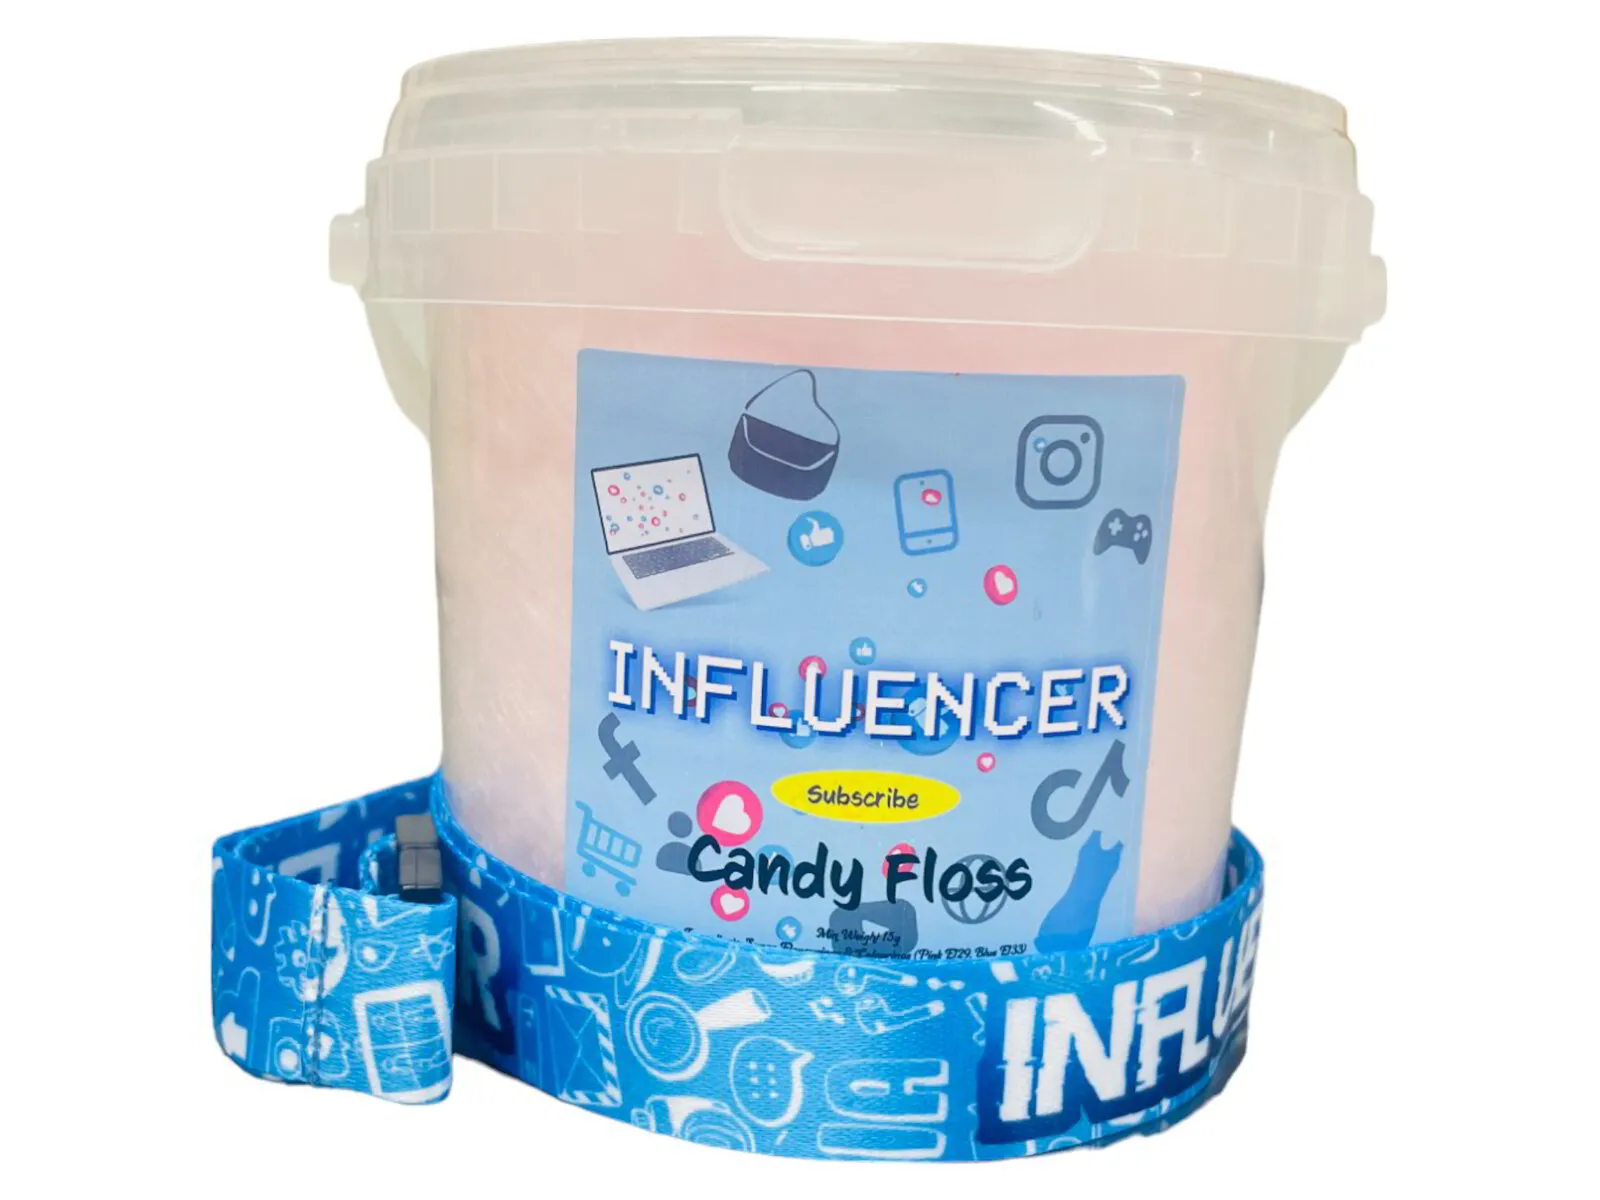 12x Influencer Candy Floss Tubs with Lanyard